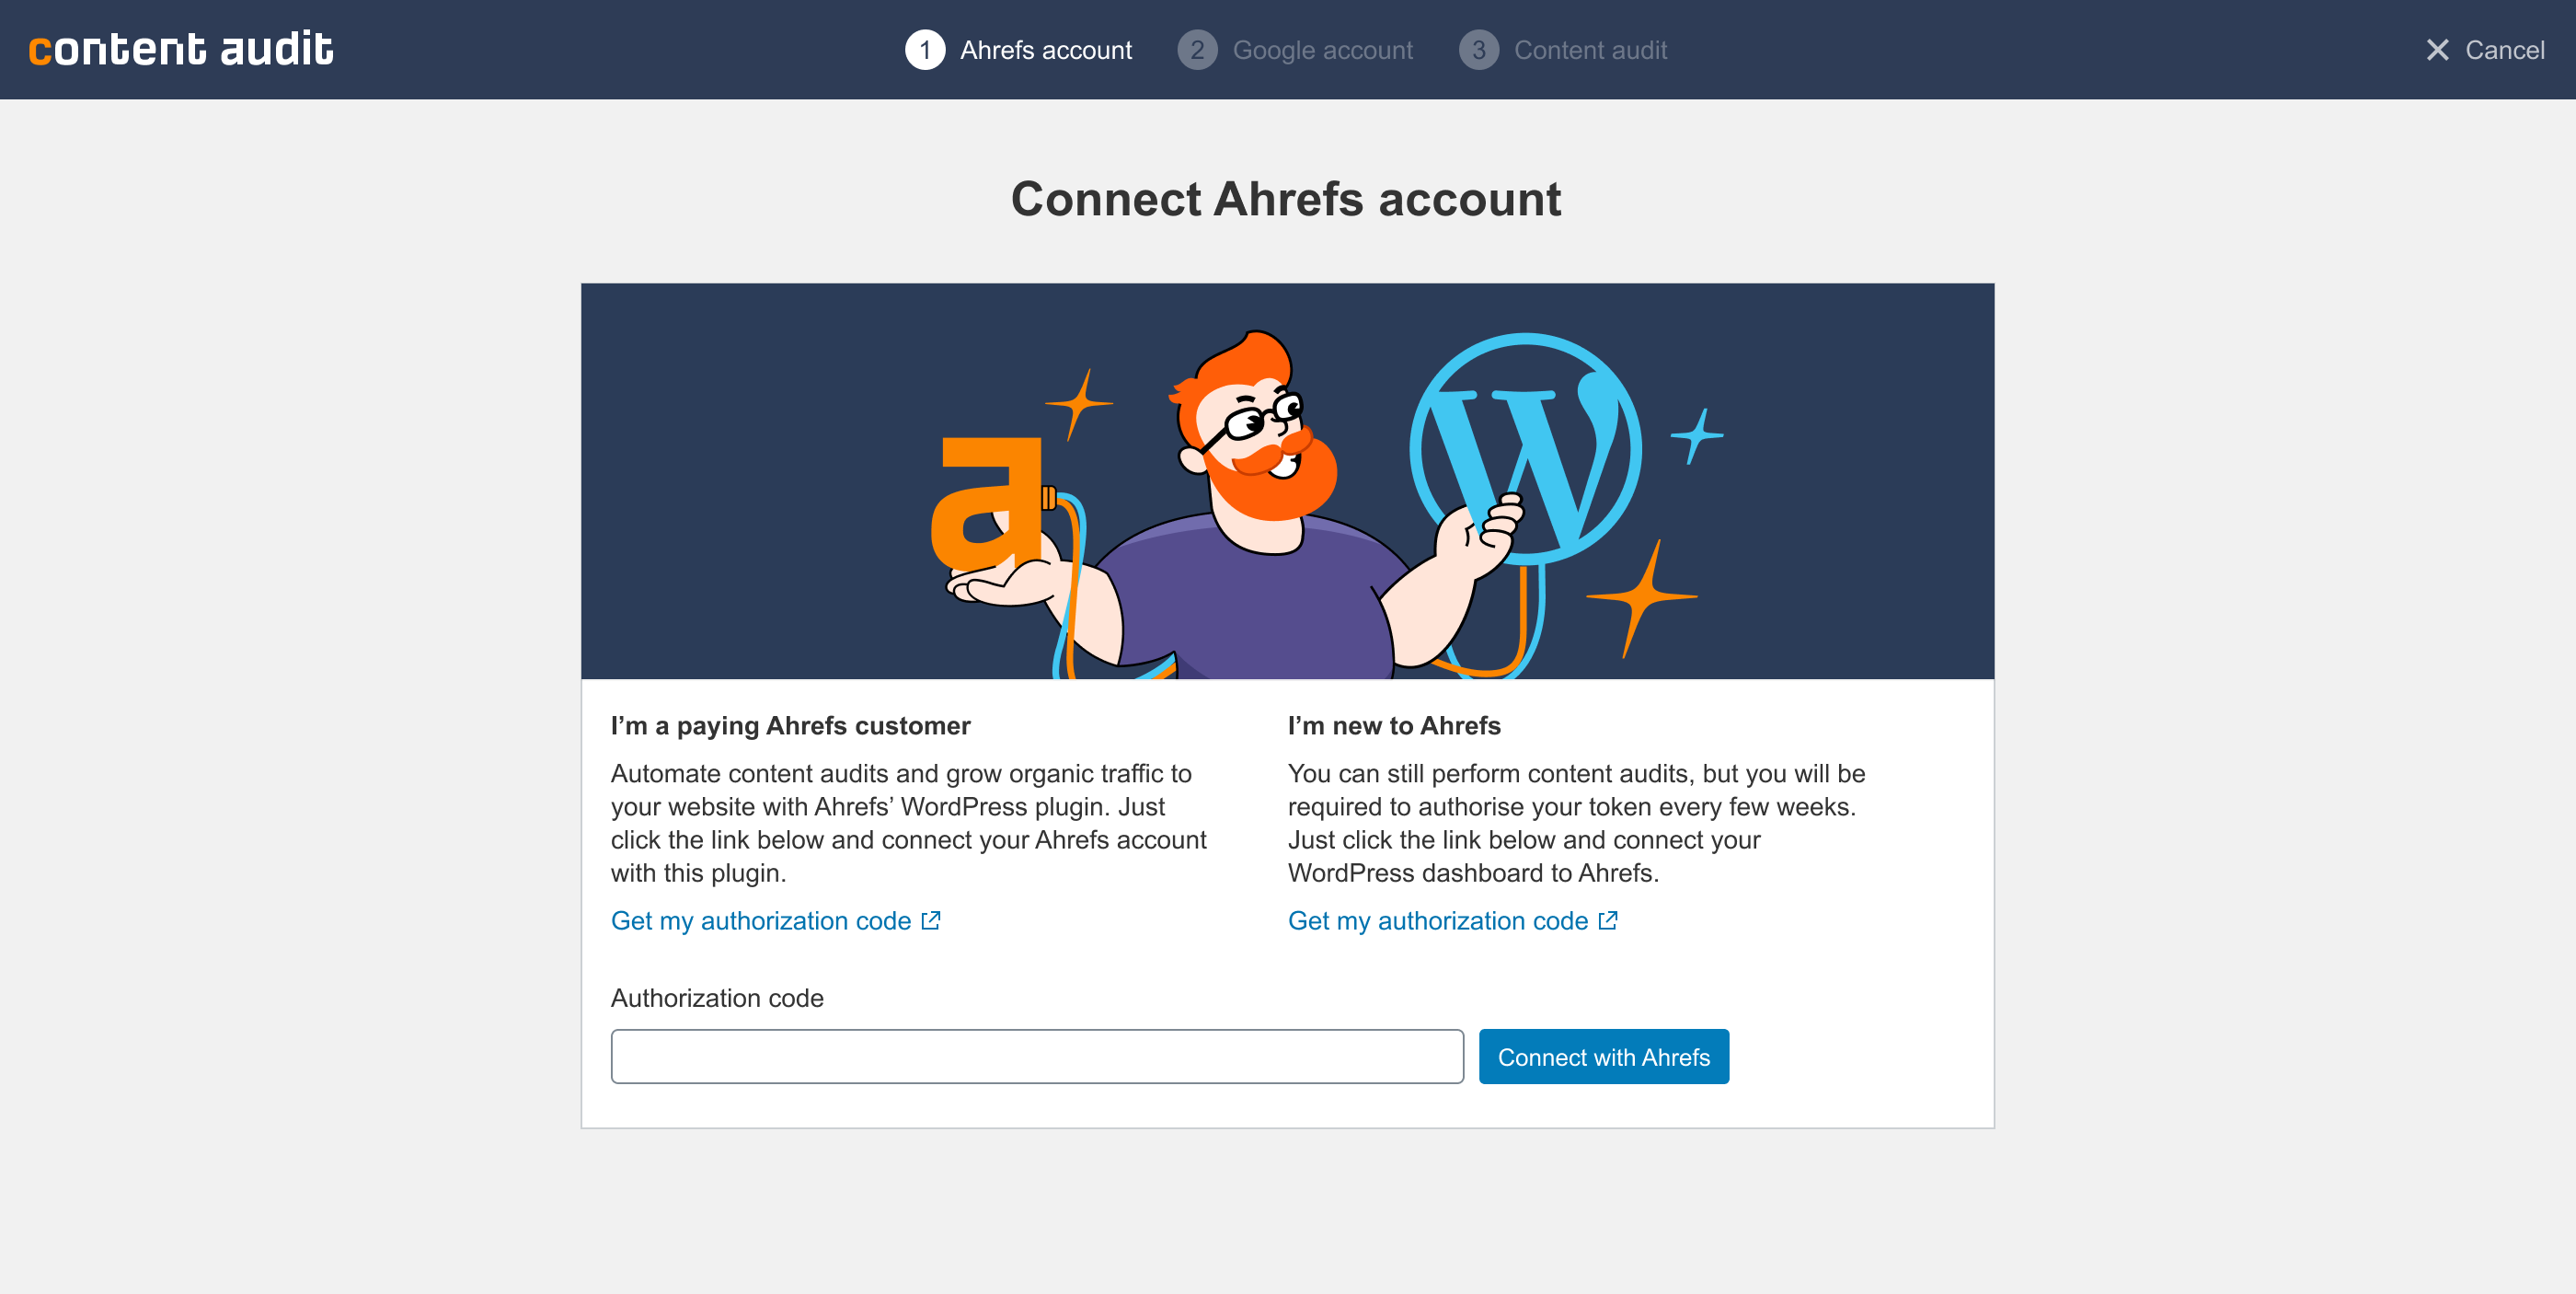 Simple setup wizard with Ahrefs and Google connectors